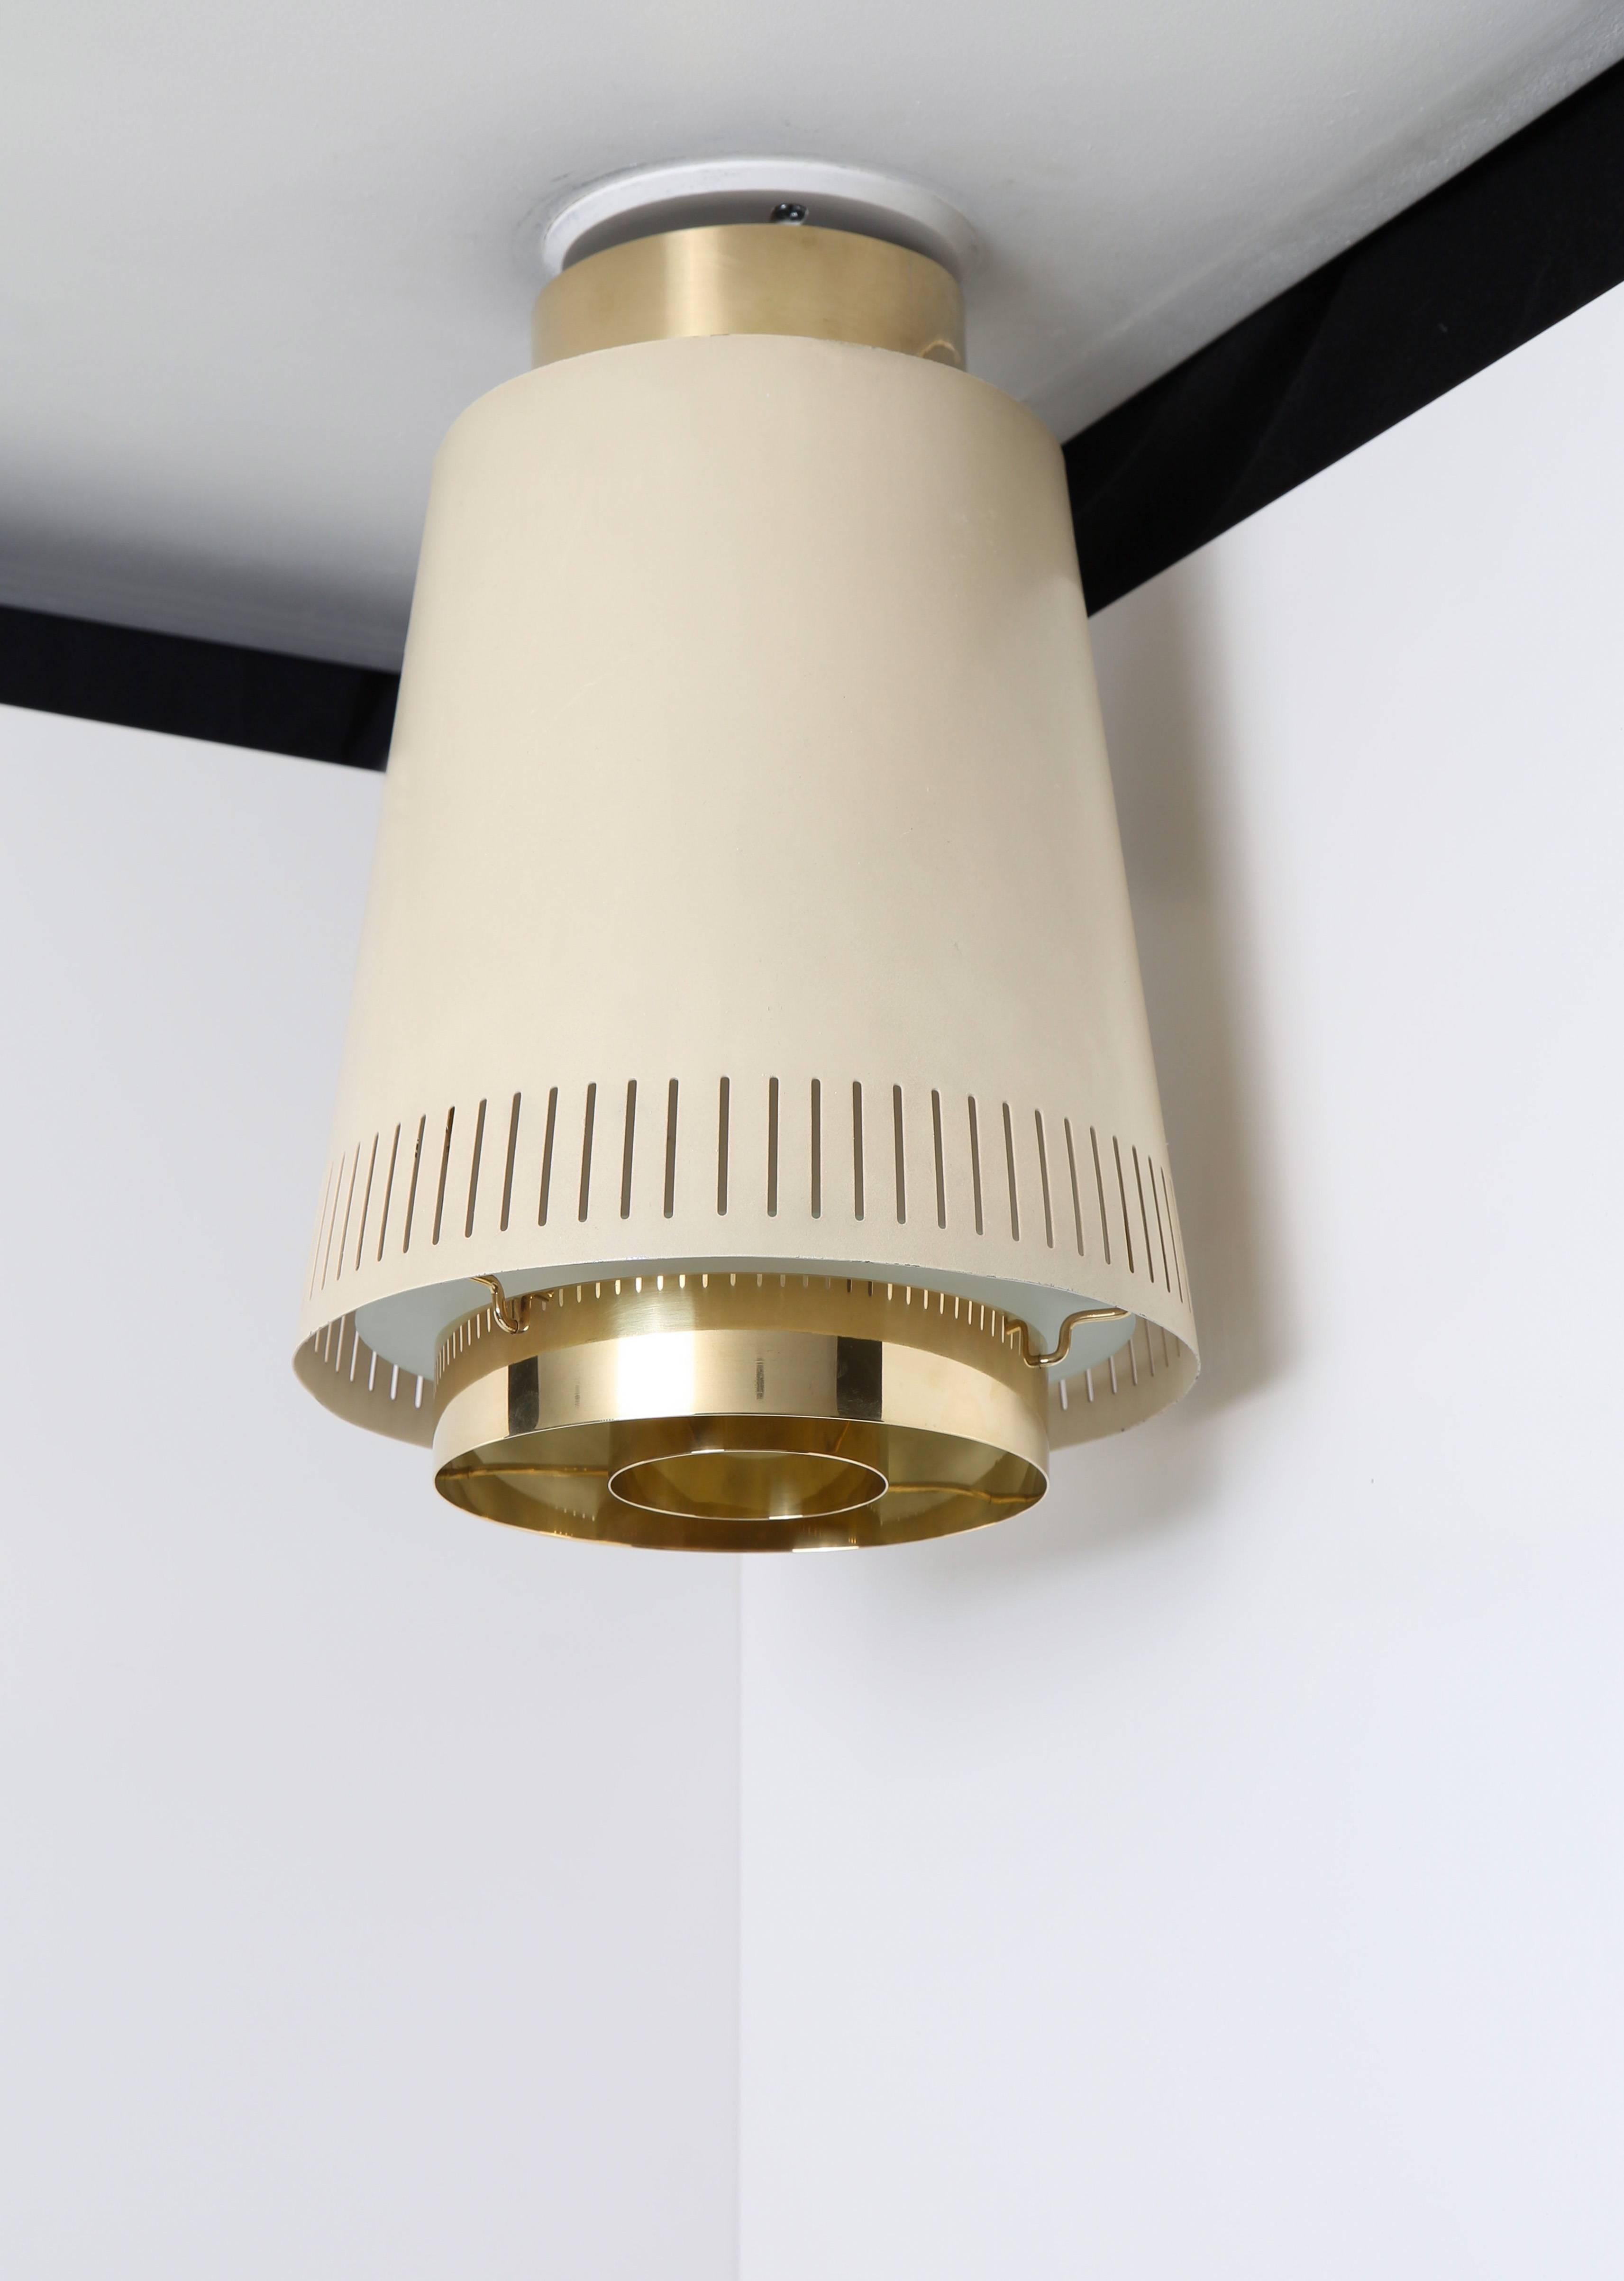 Pair of mounted ceiling lamps by Paavo Tynell, model no. 9067. 

Finland, circa 1950s. 
One item impressed with manufacturer's mark [Idman]. 

Brass, off-white painted metal with frost glass diffuser.

Height 33 x diameter 23 cm.
12.9 H x 9